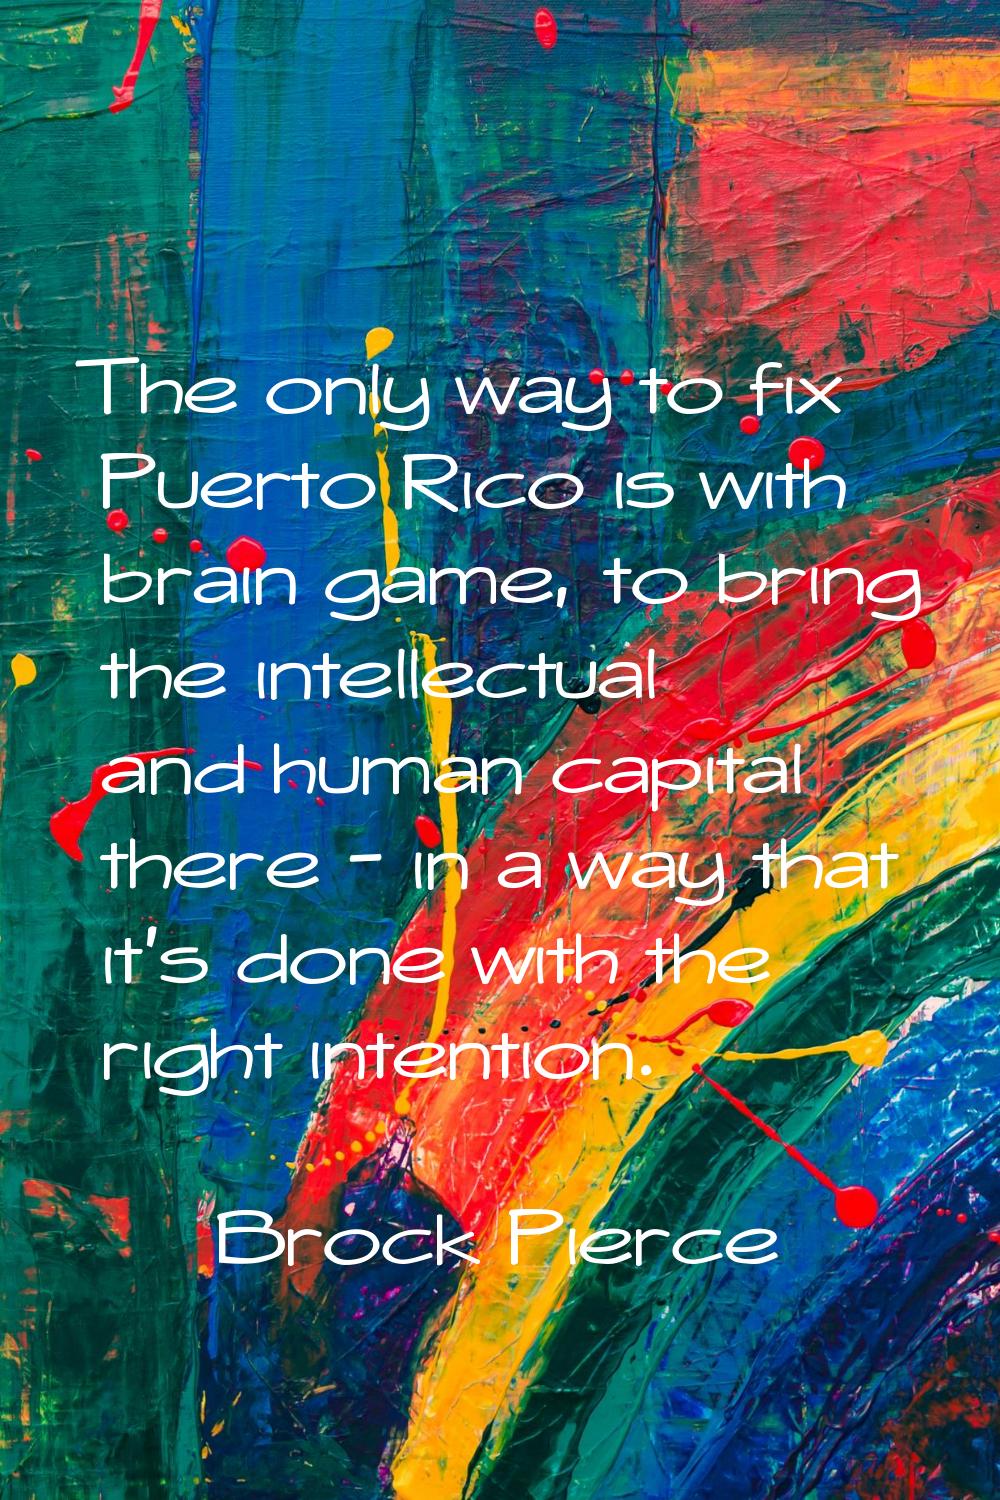 The only way to fix Puerto Rico is with brain game, to bring the intellectual and human capital the